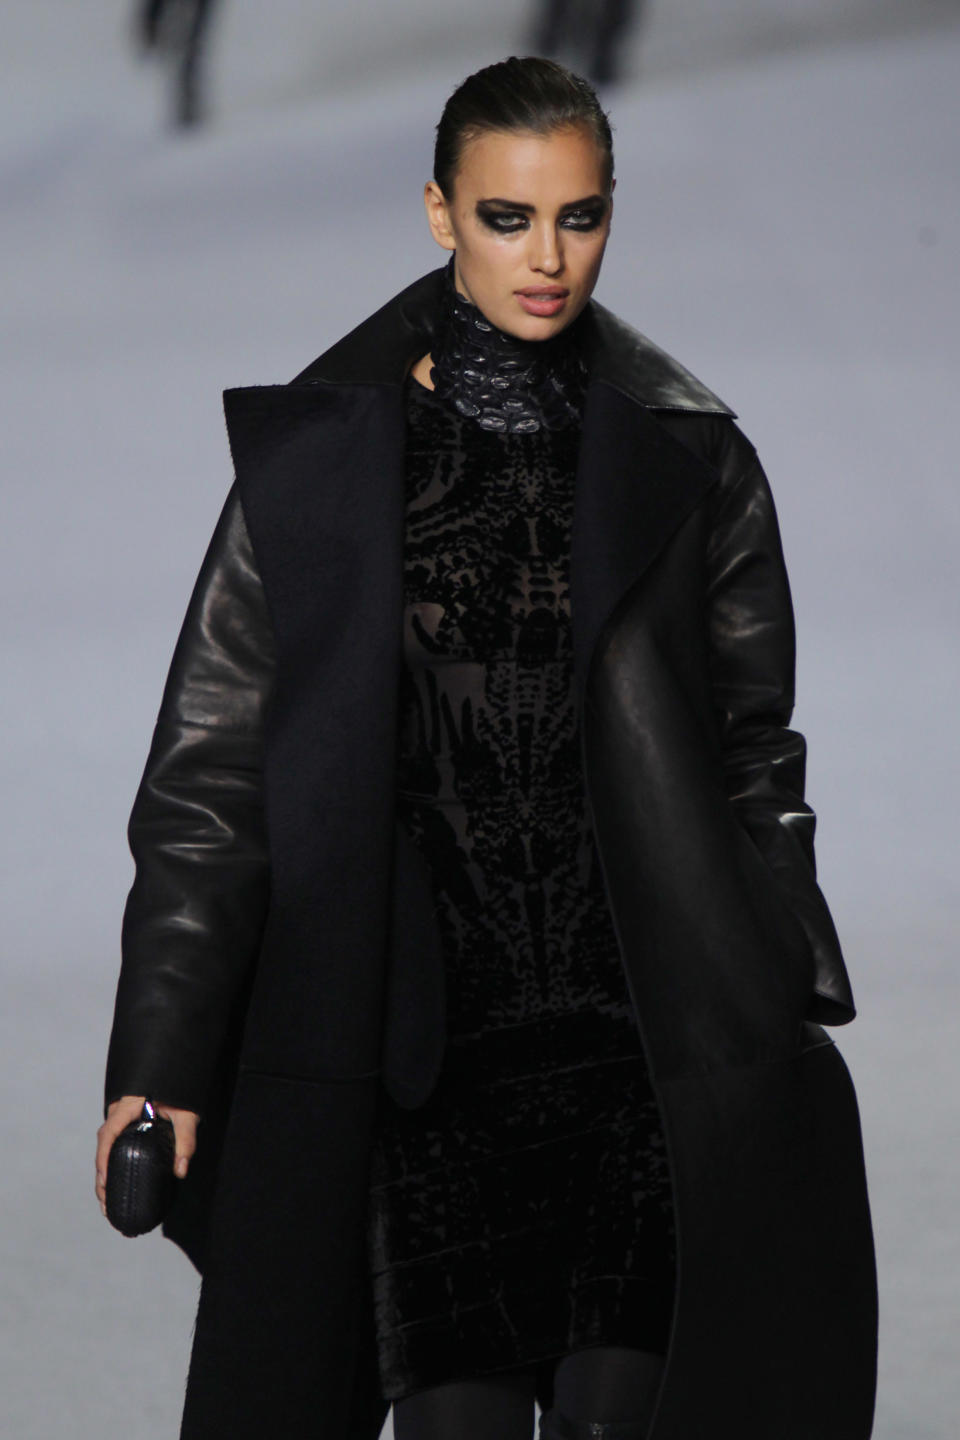 Irina Shayk walks the runway at the Kanye West  Ready-To-Wear Fall/Winter 2012 show as part of Paris Fashion Week at Halle Freyssinet on March 6, 2012 in Paris, France